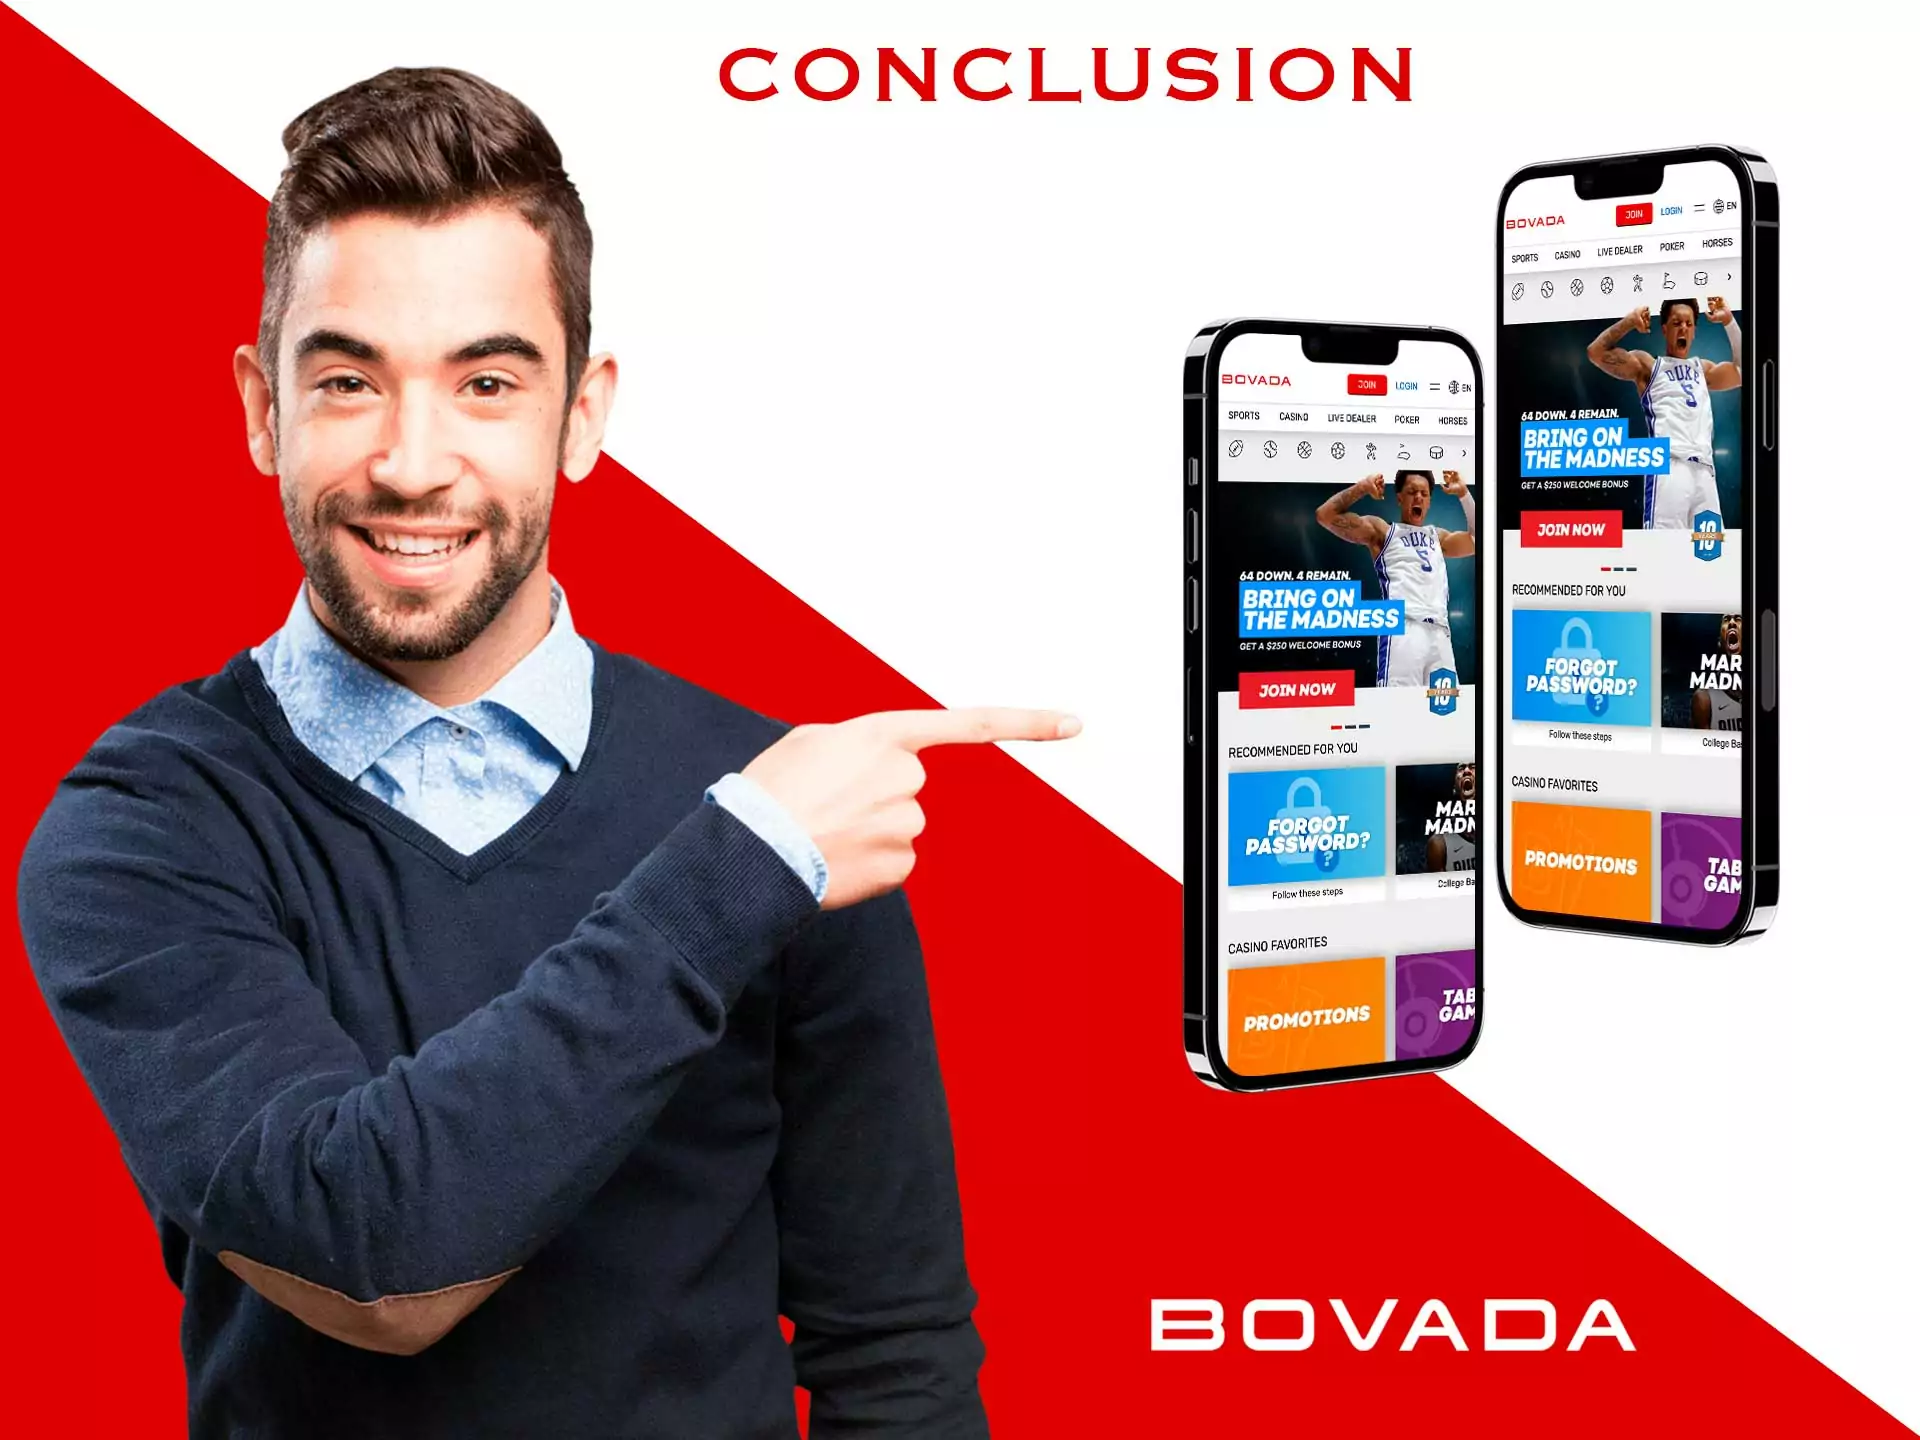 The Bovada app is a quality app, it provides bonuses that give a good start for beginners.